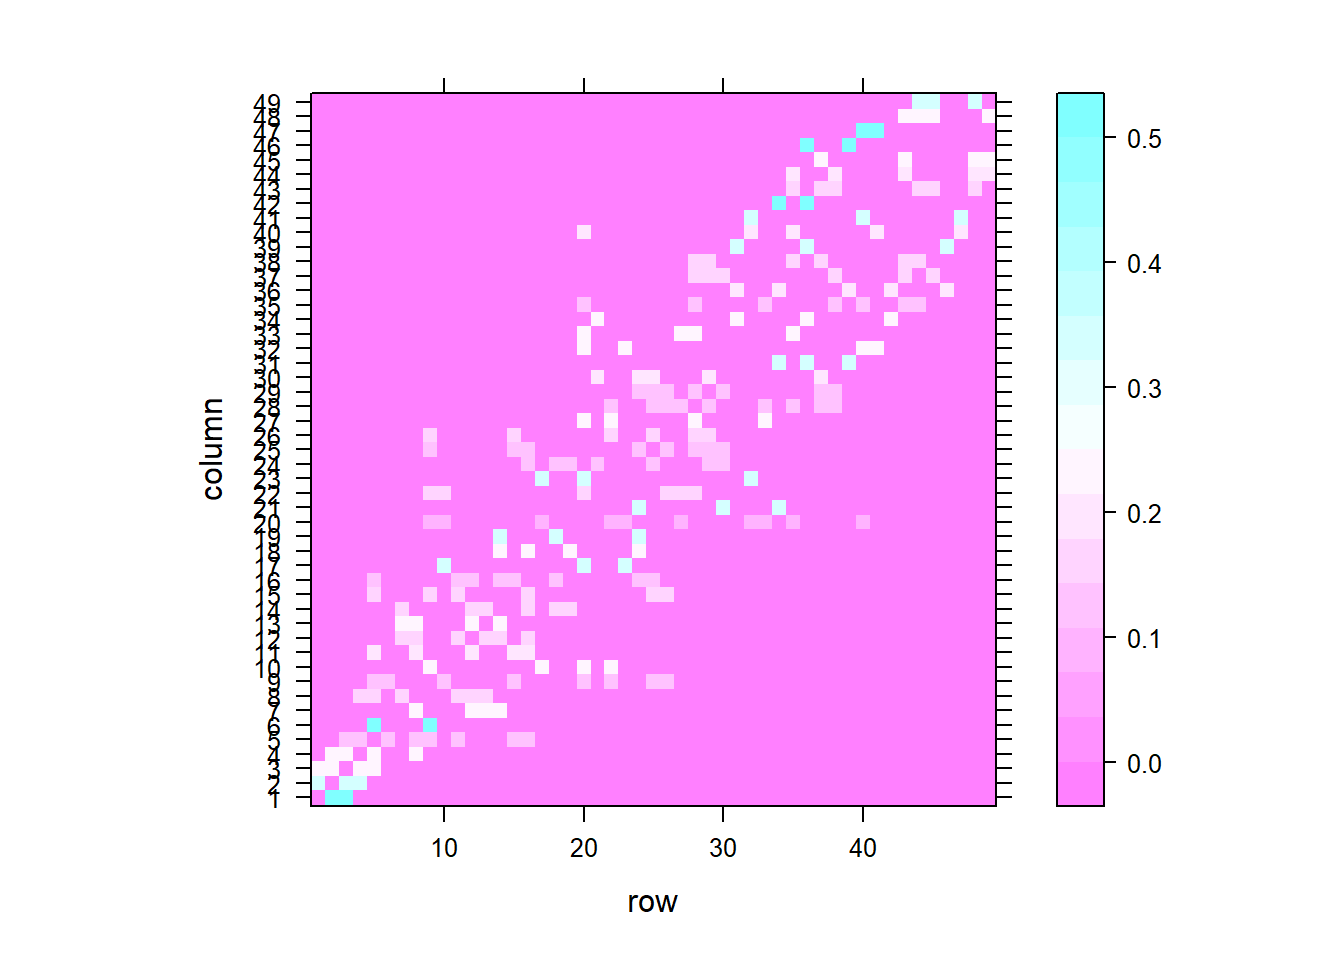 Spatial weights matrix based on binary neighbor list (left), and inverse distance values (right).